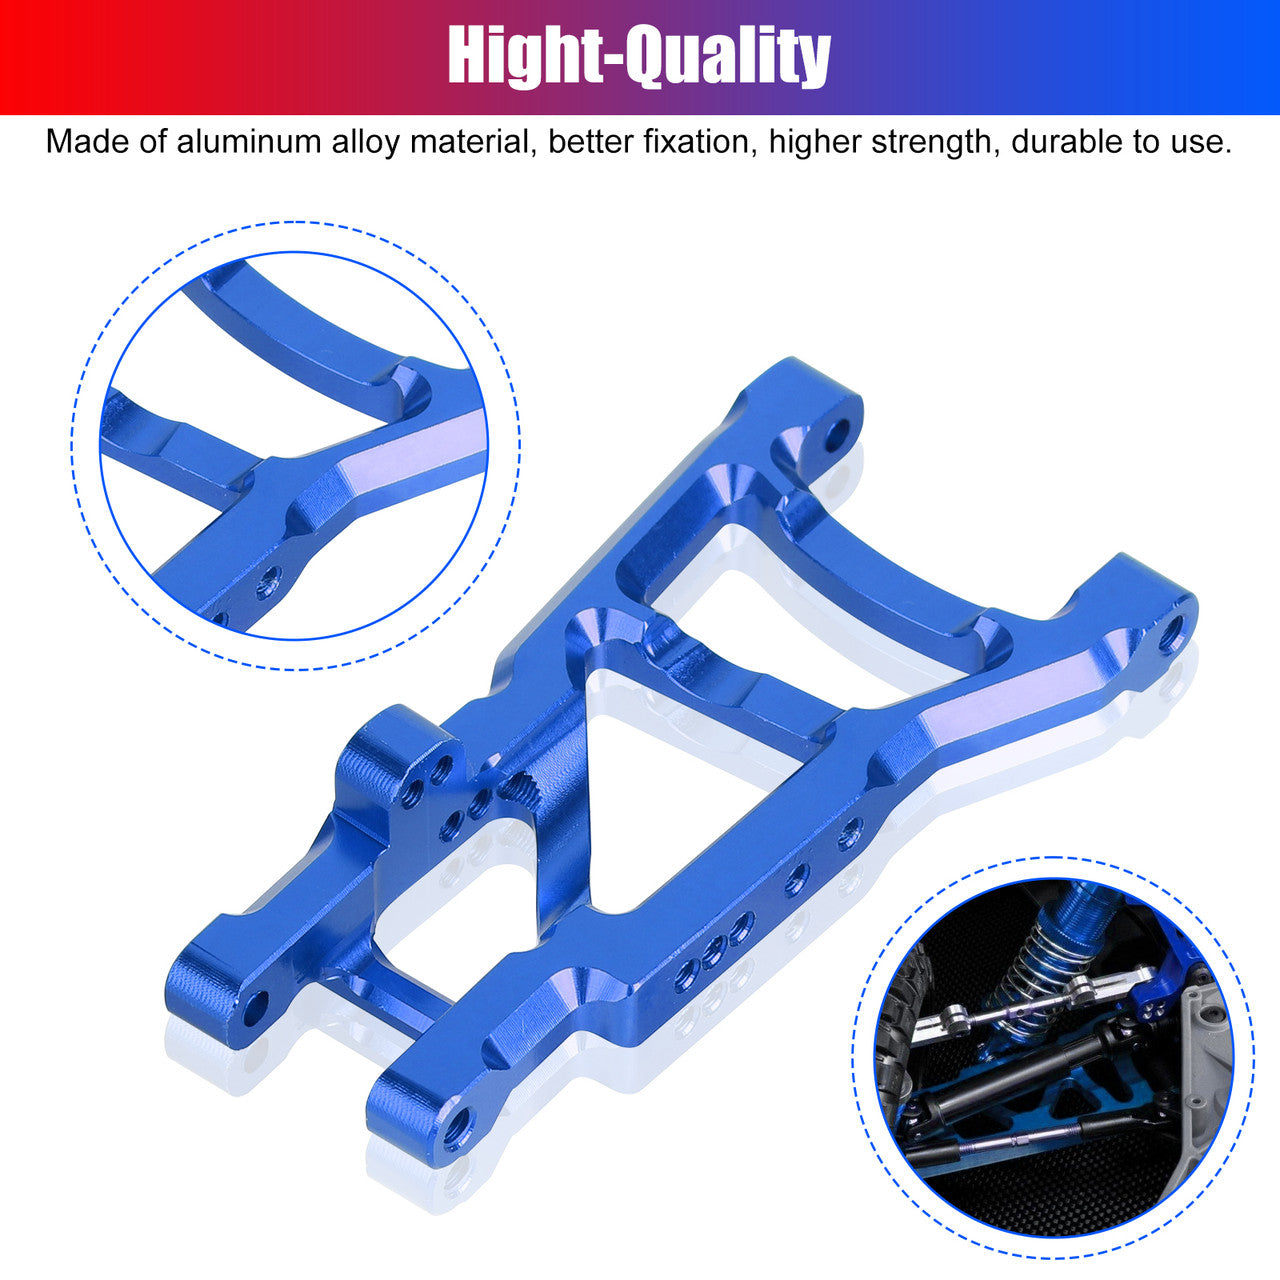 Metal Full Set RC Car Parts that Offer Lightweight Performance,For 1/10 Traxxas Slash 2WD, Blue